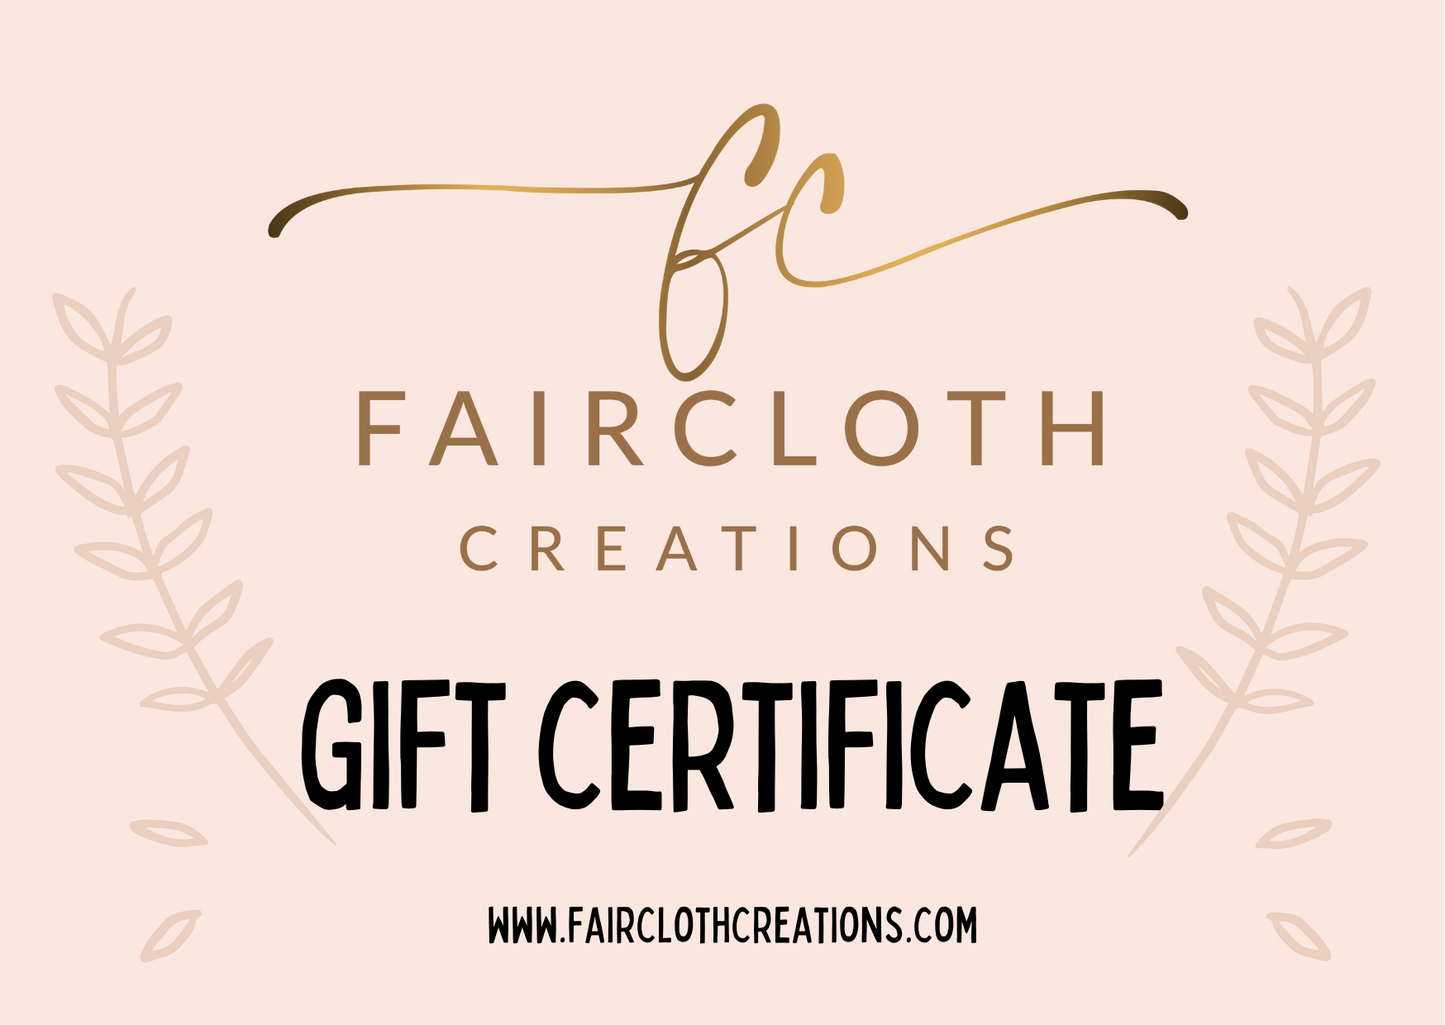 Faircloth Creations Gift Certificate